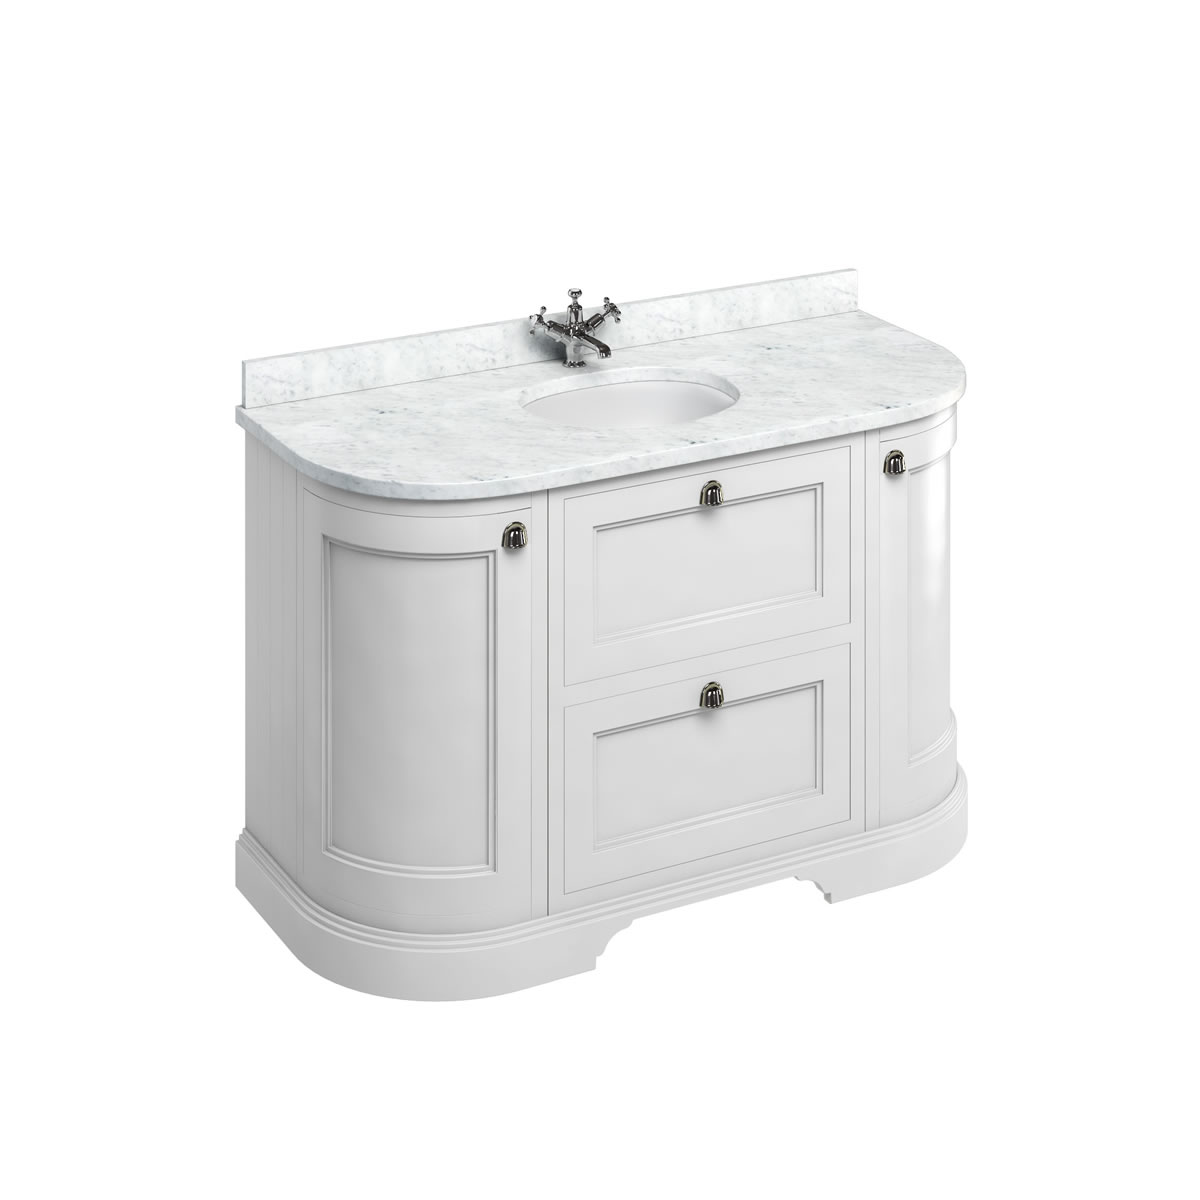 Freestanding 134 Curved Vanity Unit with drawers - Matt White and Minerva Carrara white worktop with integrated white basin